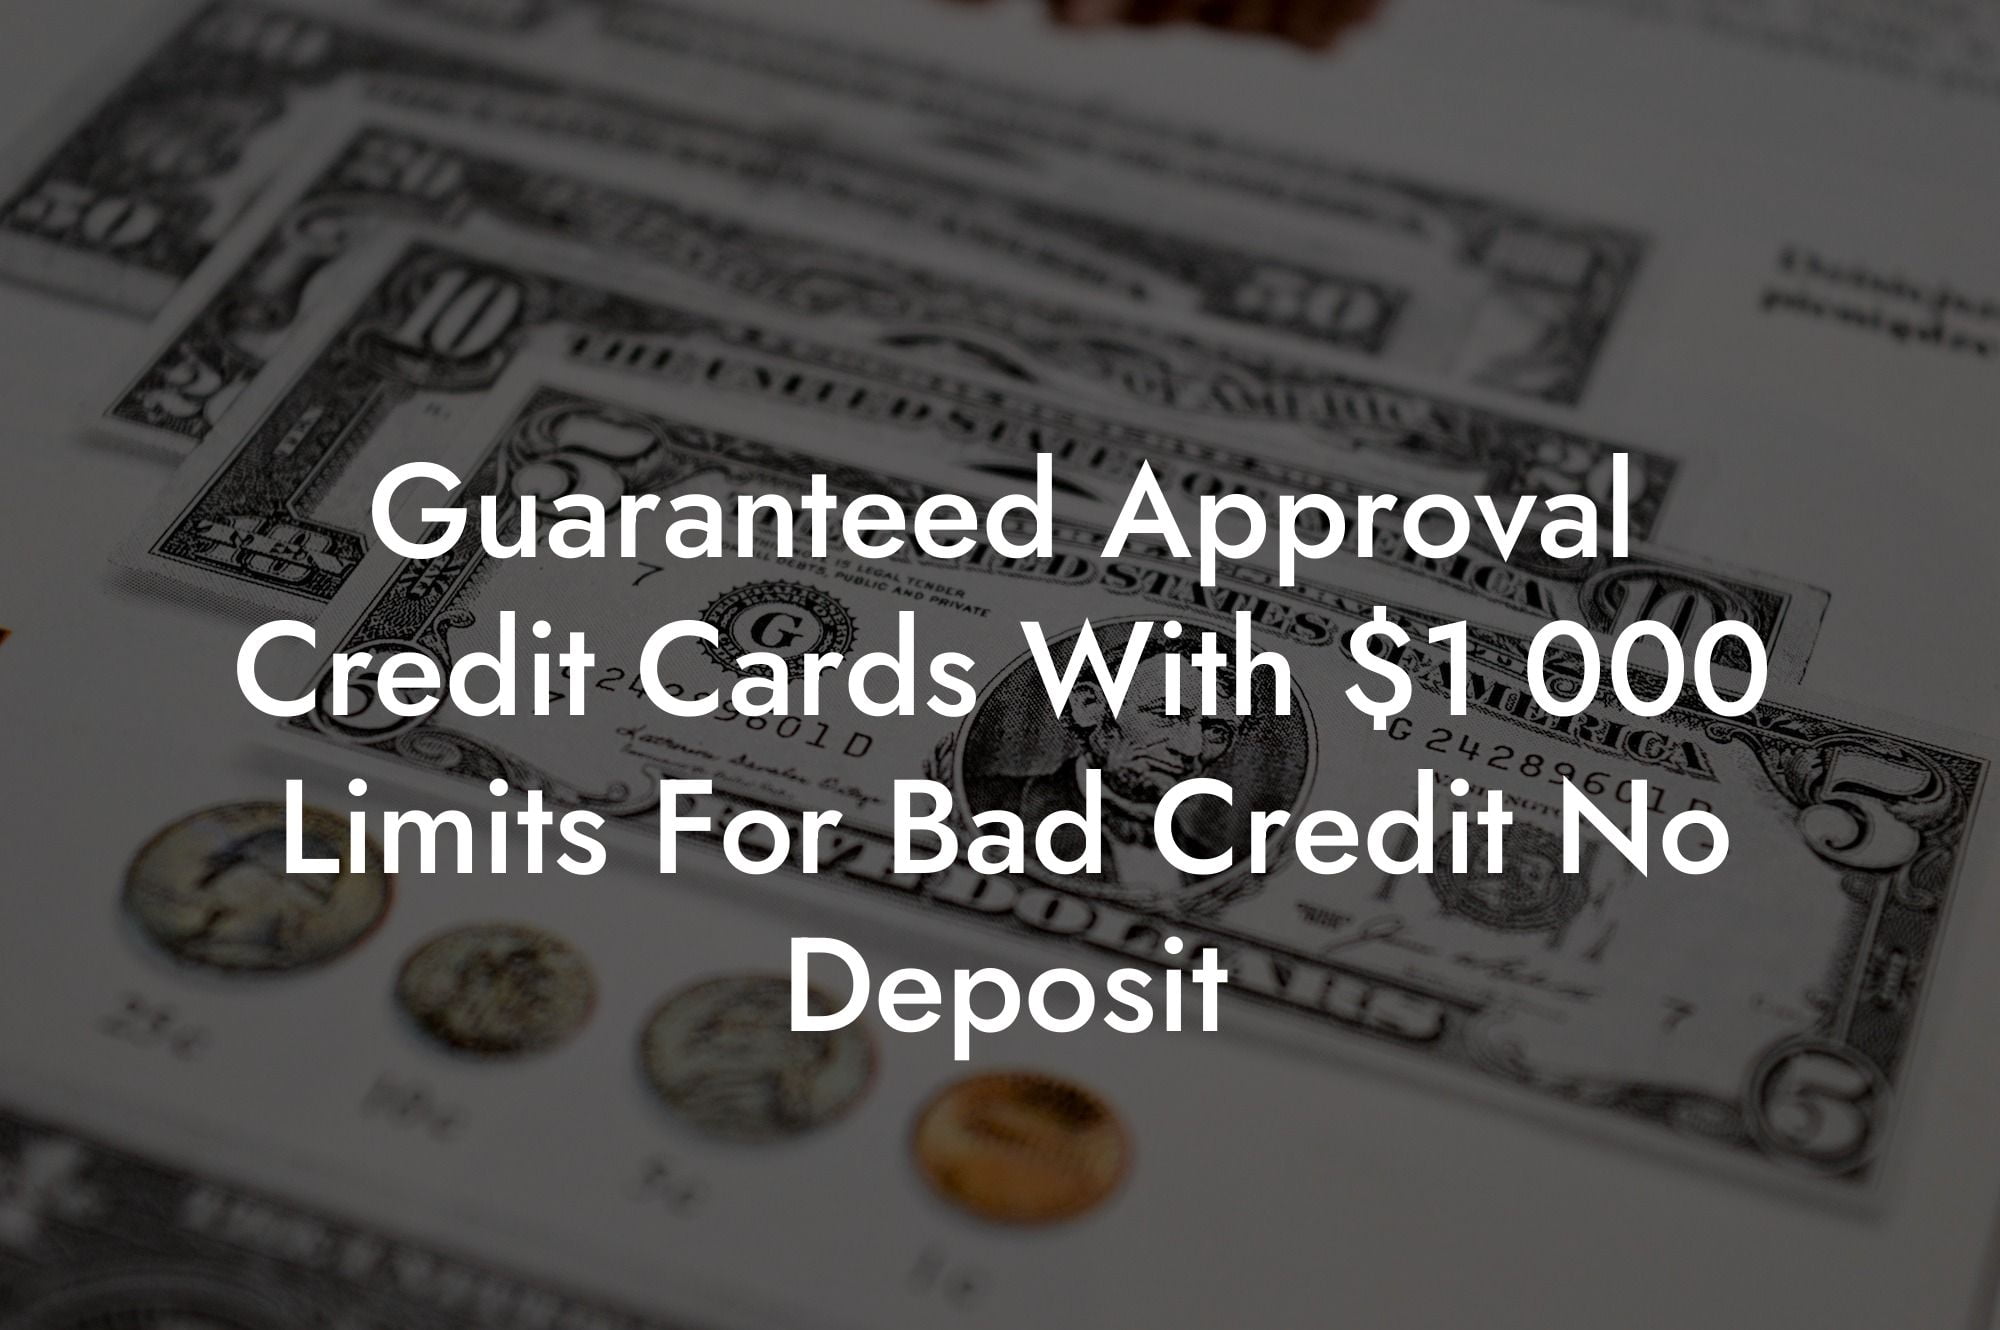 Guaranteed Approval Credit Cards With $1 000 Limits For Bad Credit No Deposit